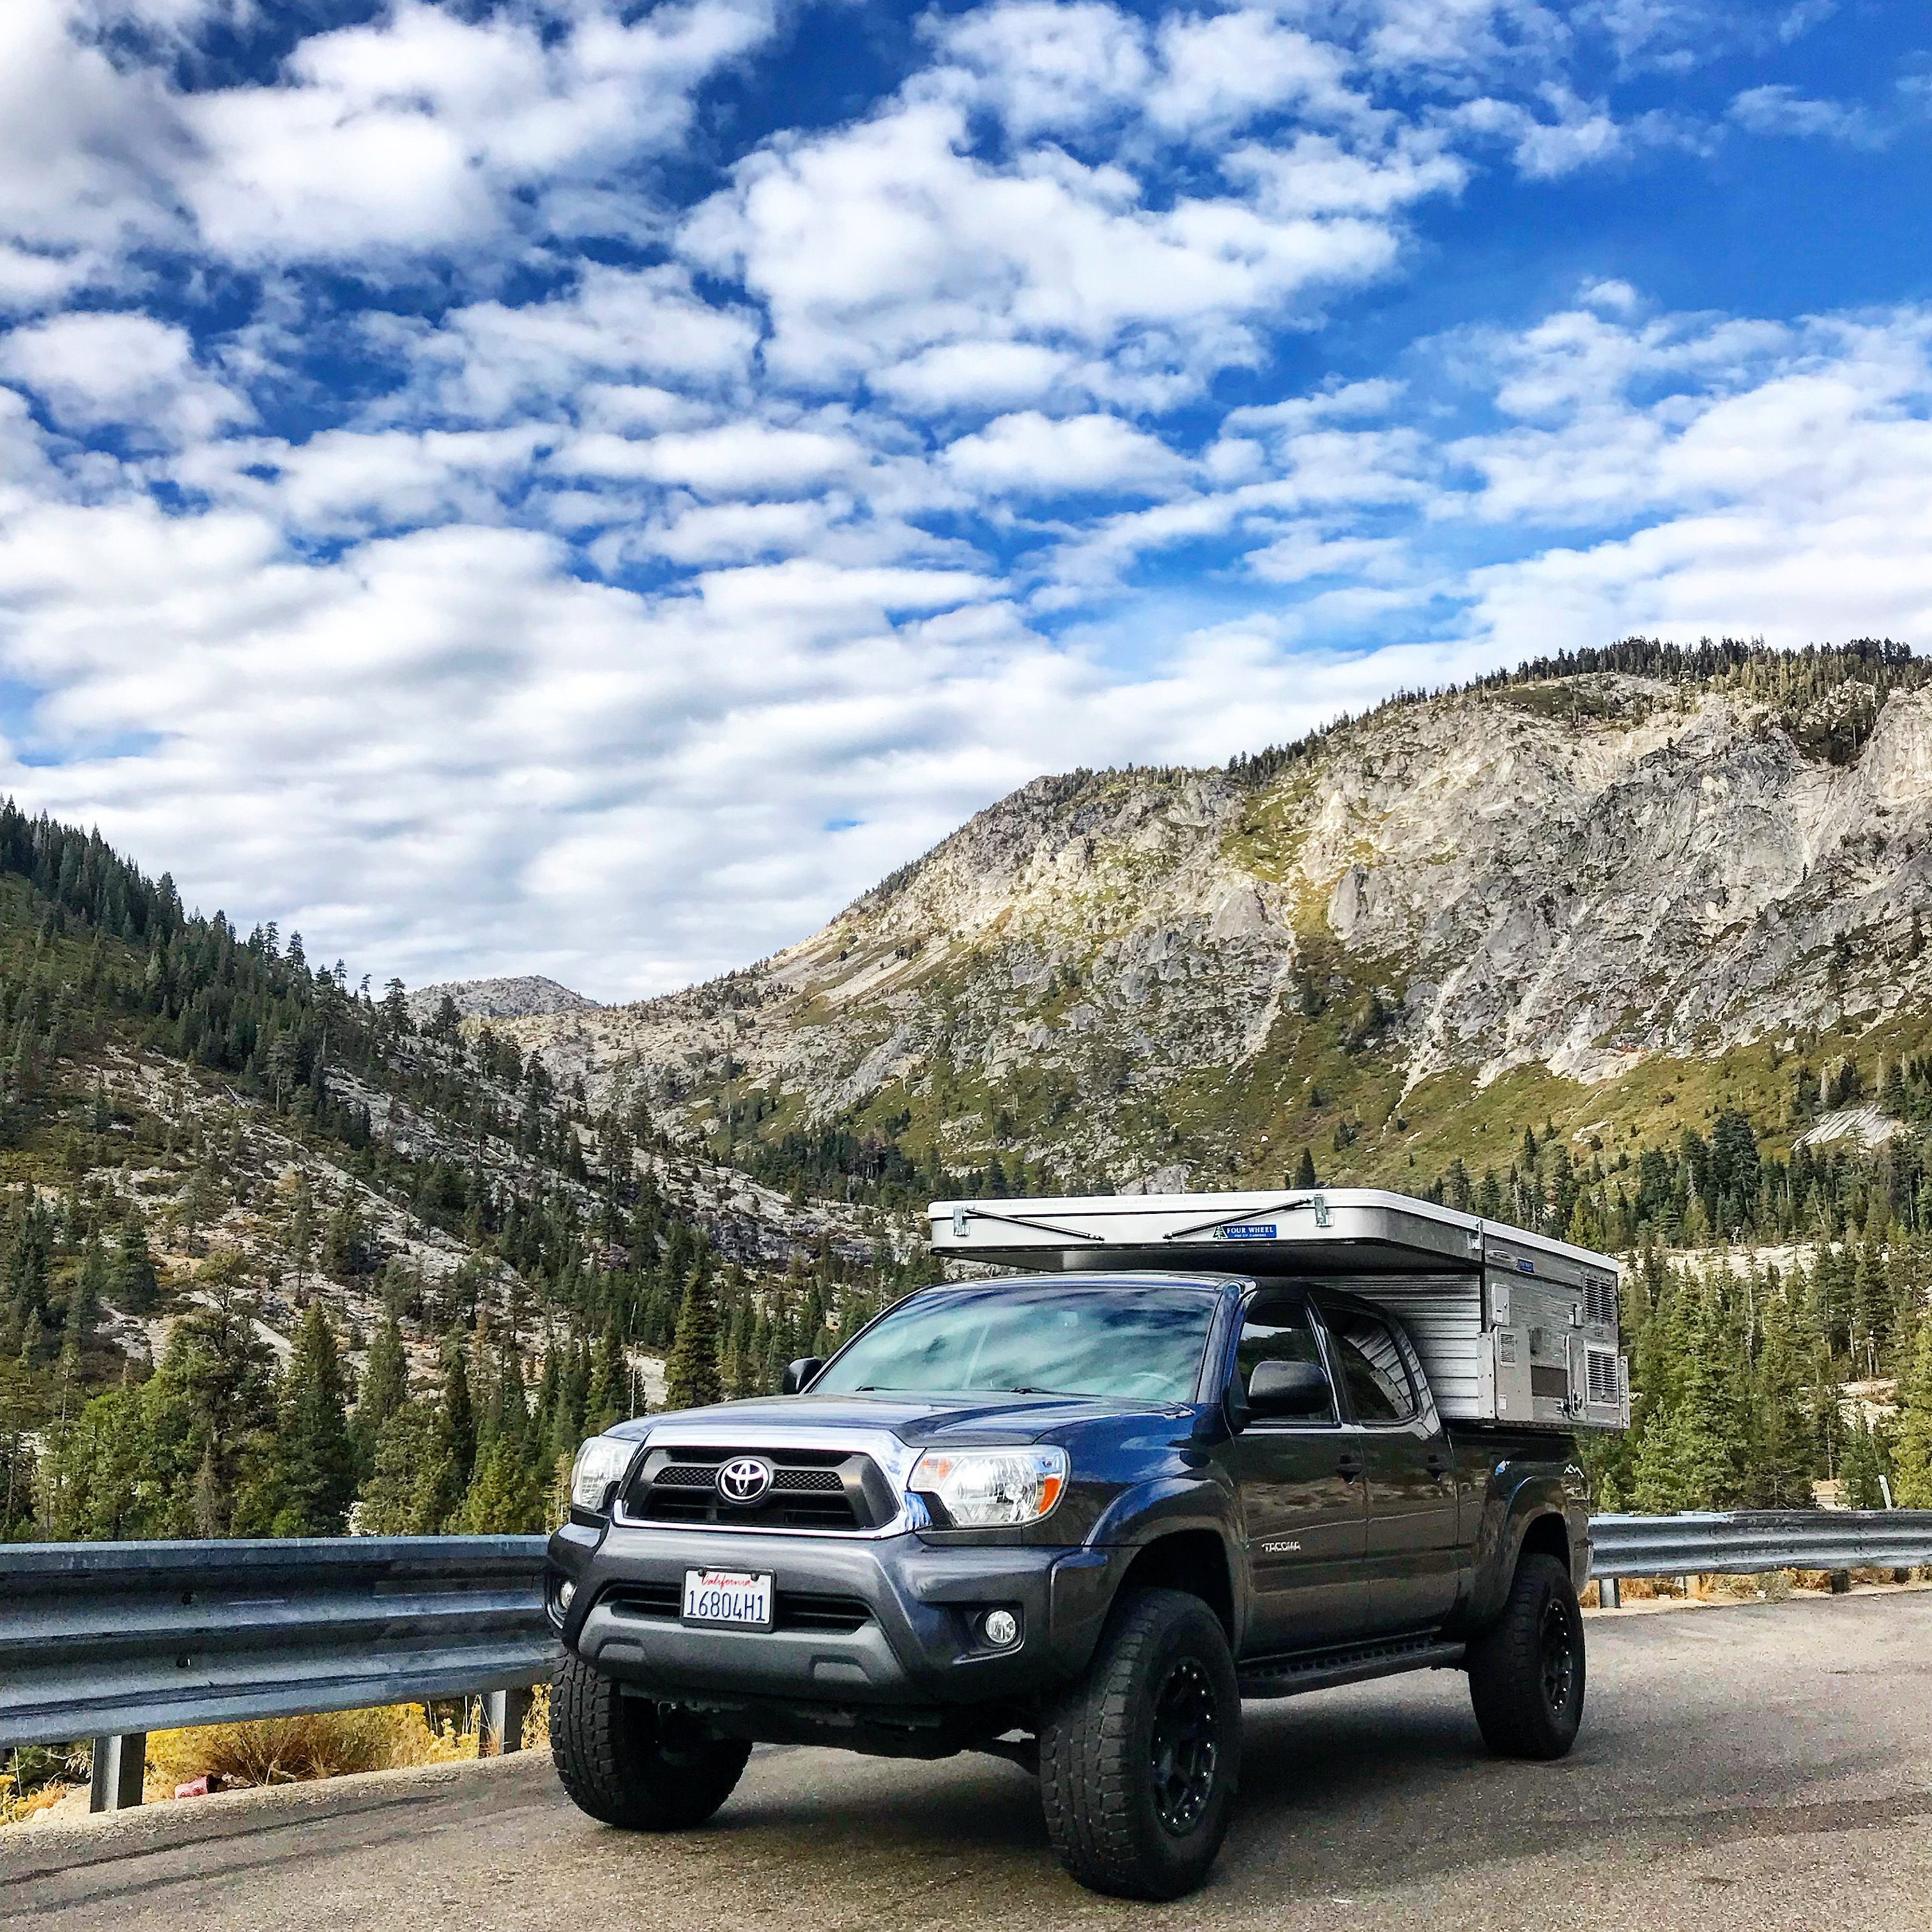 Toyota Tacoma Camper on the way to  Lake Tahoe, with mountains and pine trees in the background